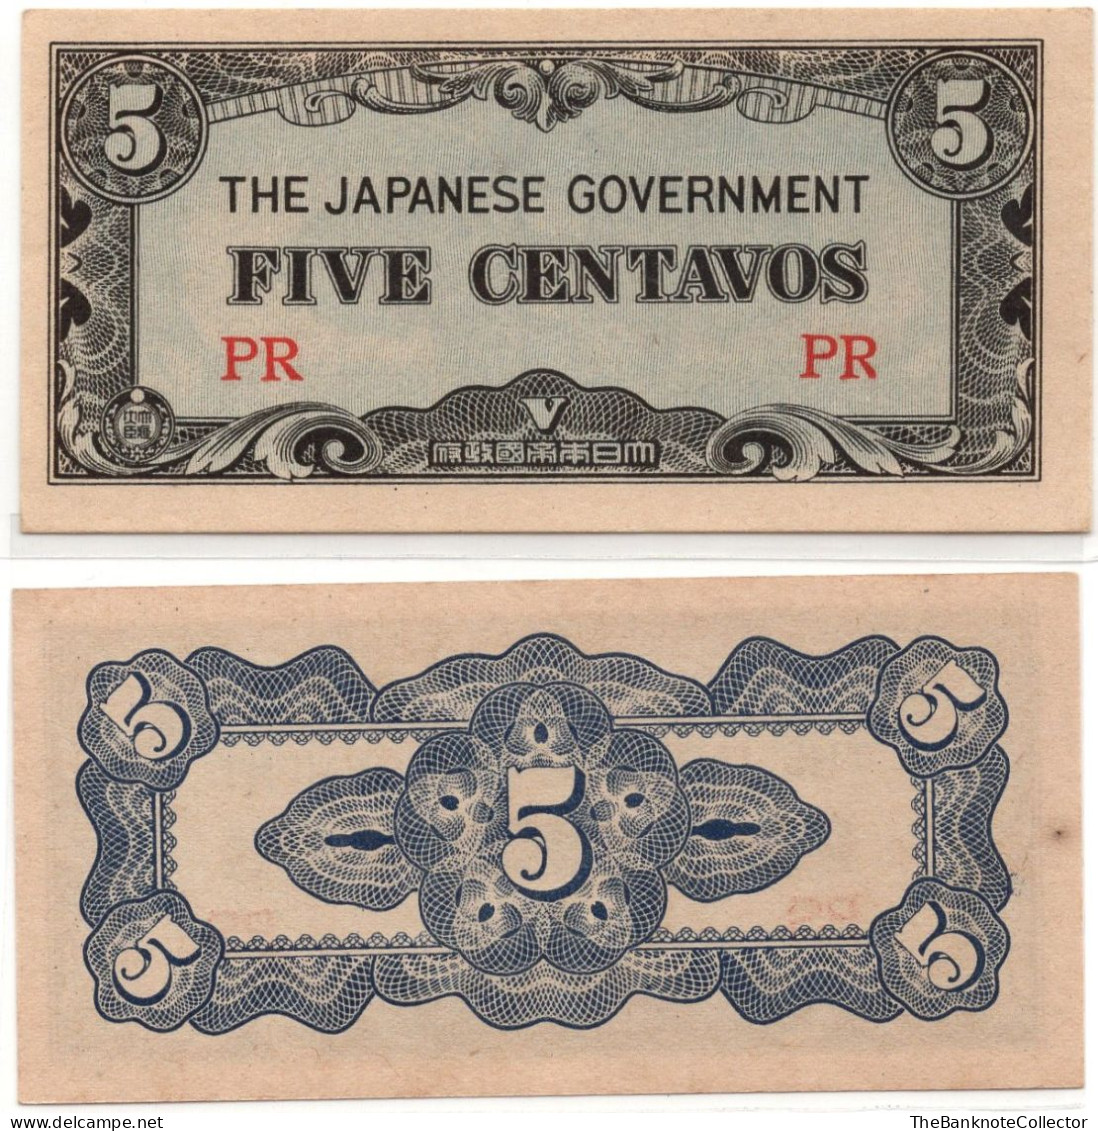 Japan Government Occupation JIM Philippines 5 Centavos WWII ND 1942 P-103 AUNC-UNC - Giappone